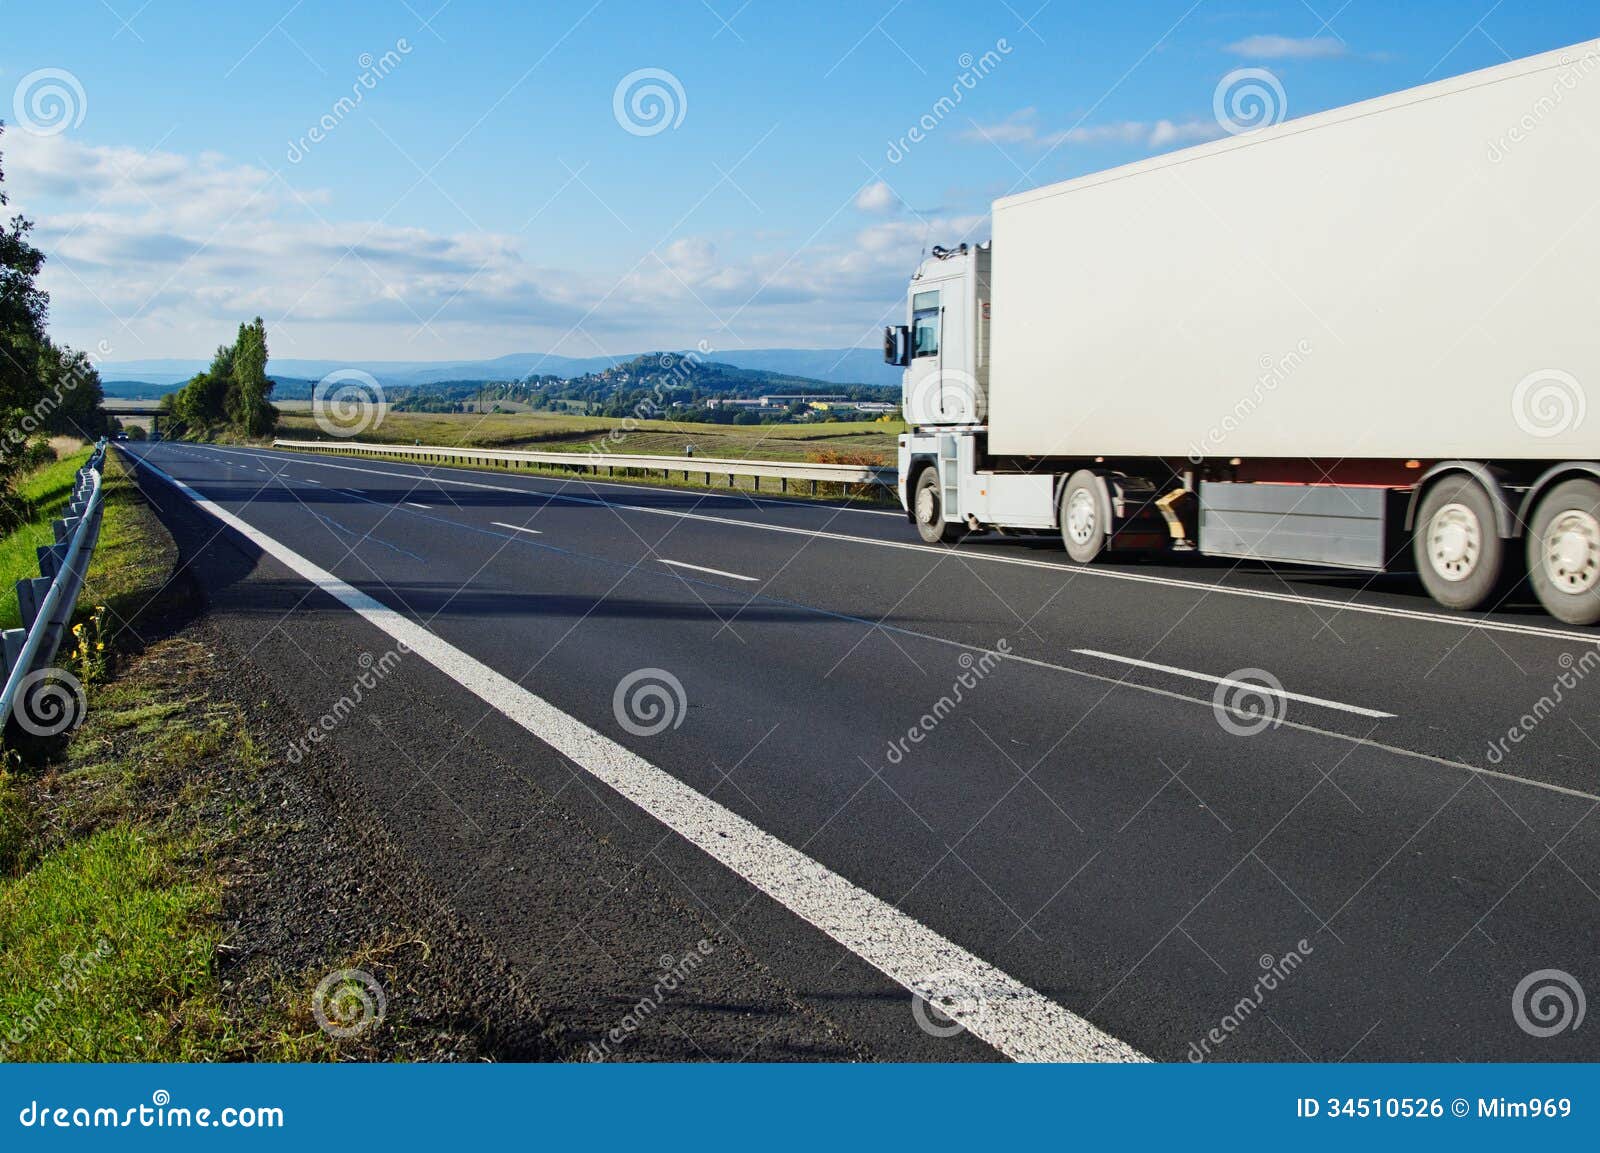 Landscape with road and truck. Landscape with road, the road goes white truck, in the distance a mountain and village